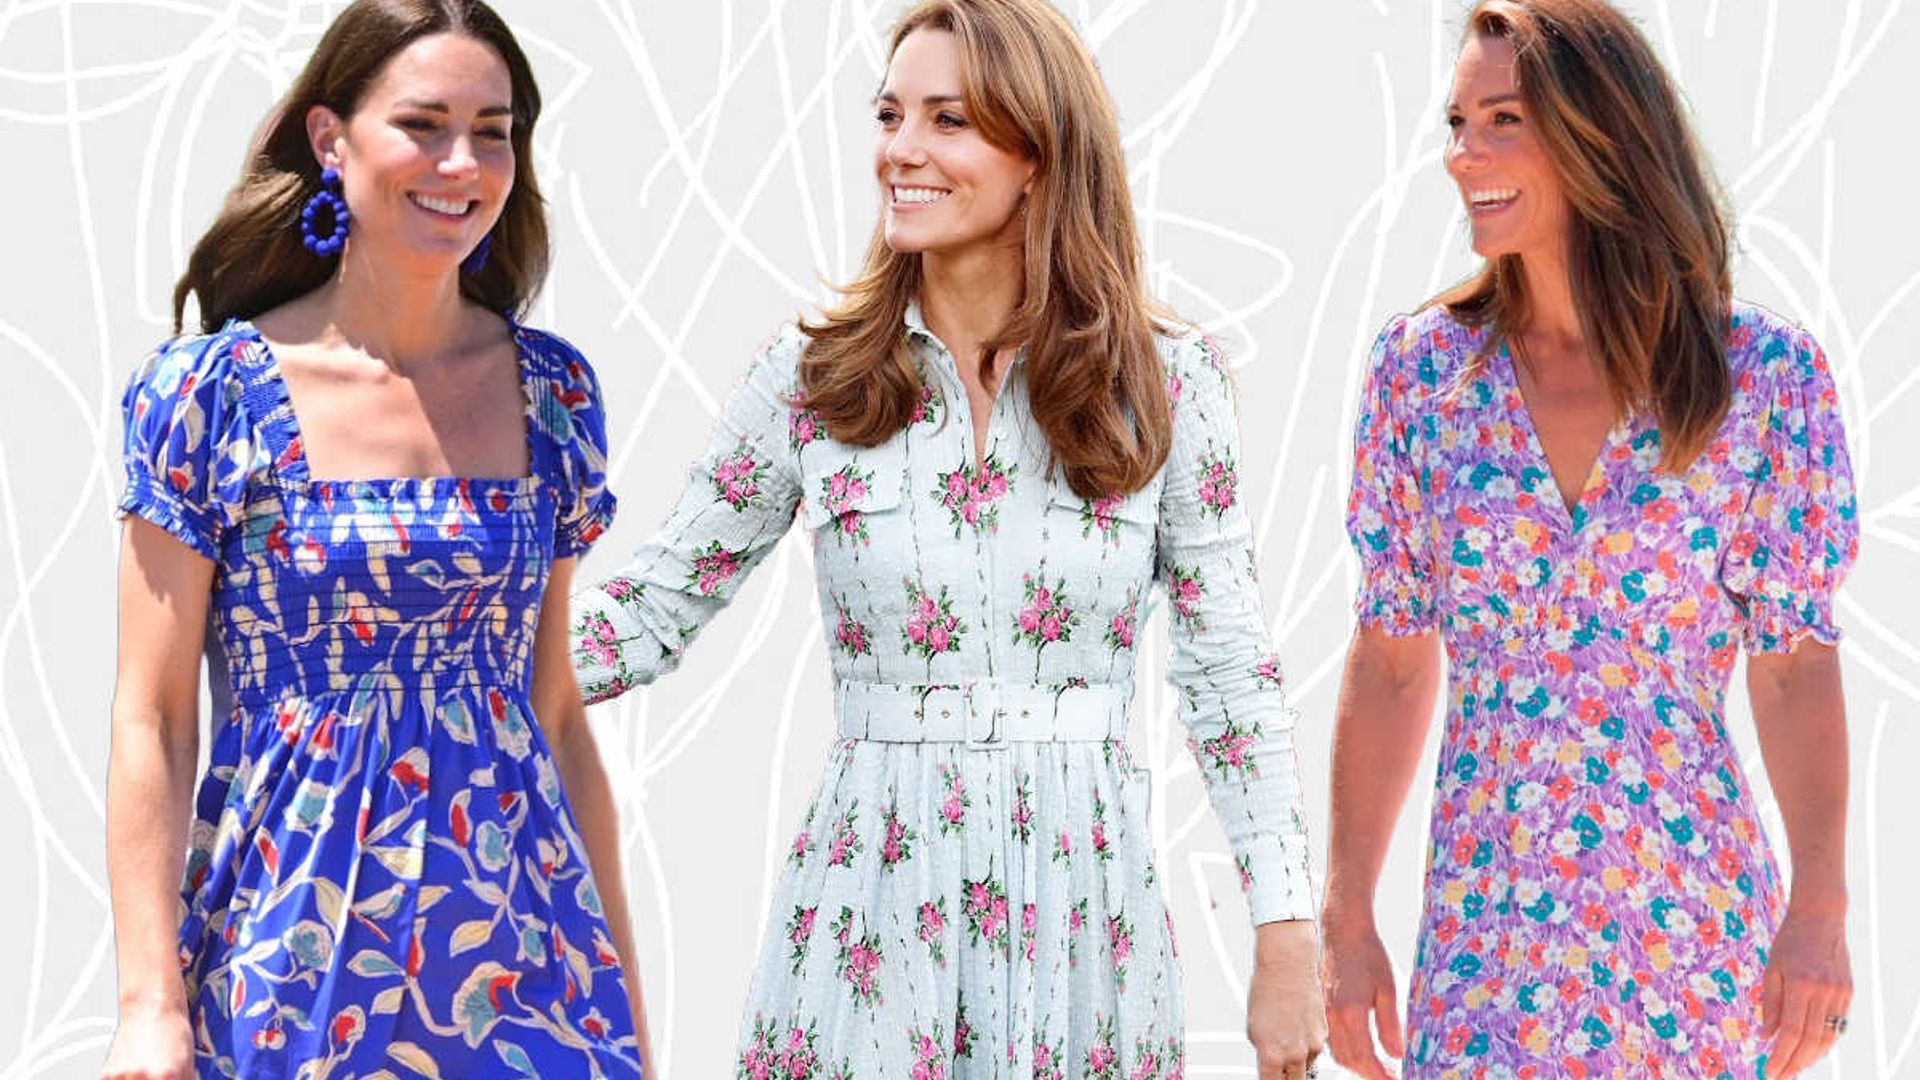 10 floral midi dresses Kate Middleton would love - and they're up to 75% off at Nordstrom Rack